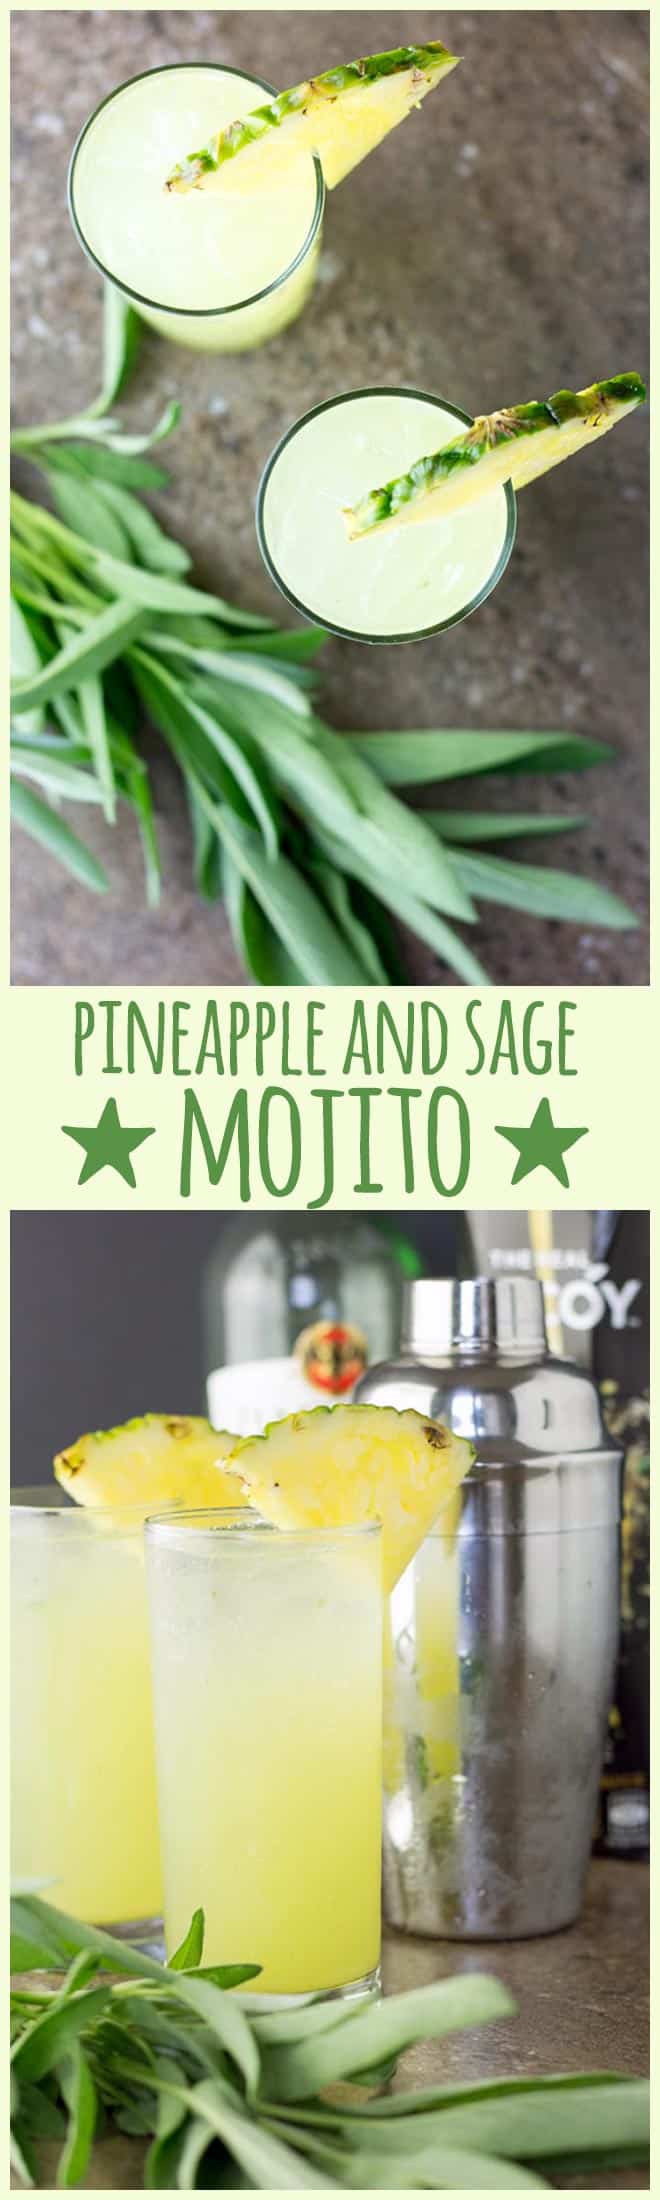 Pineapple and sage are a curiously delicious combination in this light and refreshing twist on a classic mojito.